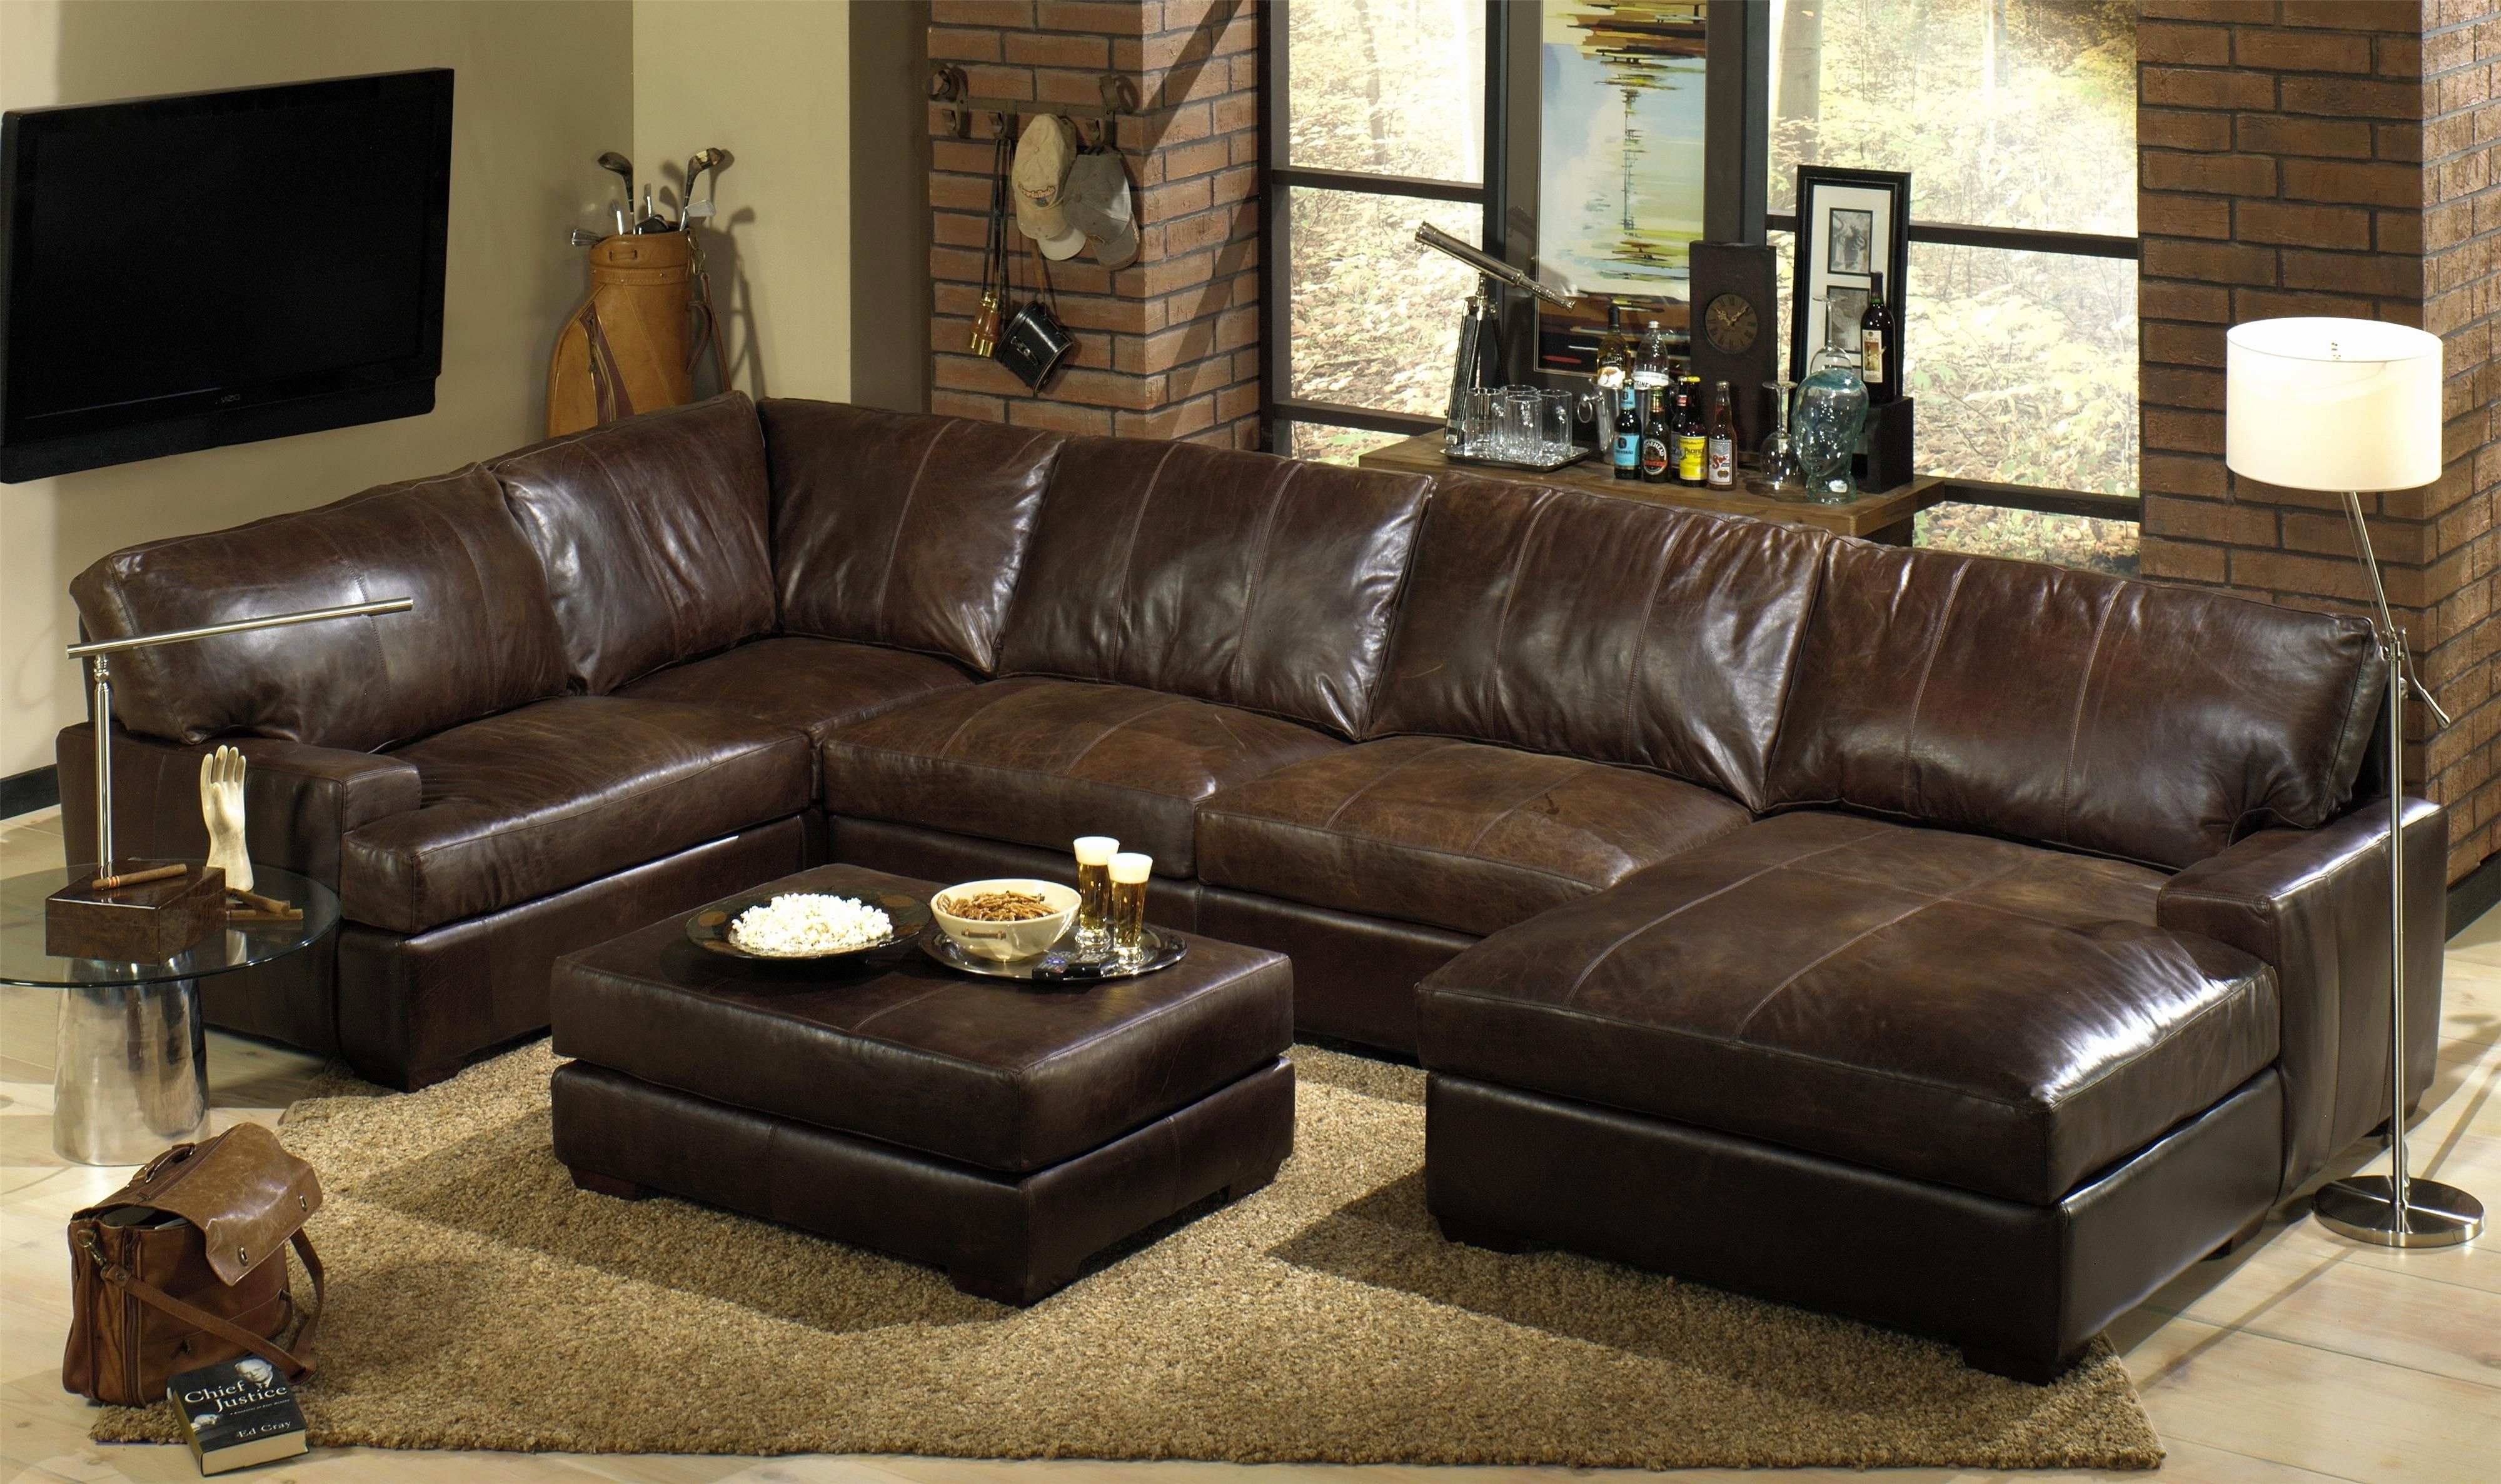 Sectional Sofa : All Leather Couch Leather Furniture Luxury Leather Throughout Chocolate Brown Sectional Sofas (View 7 of 10)